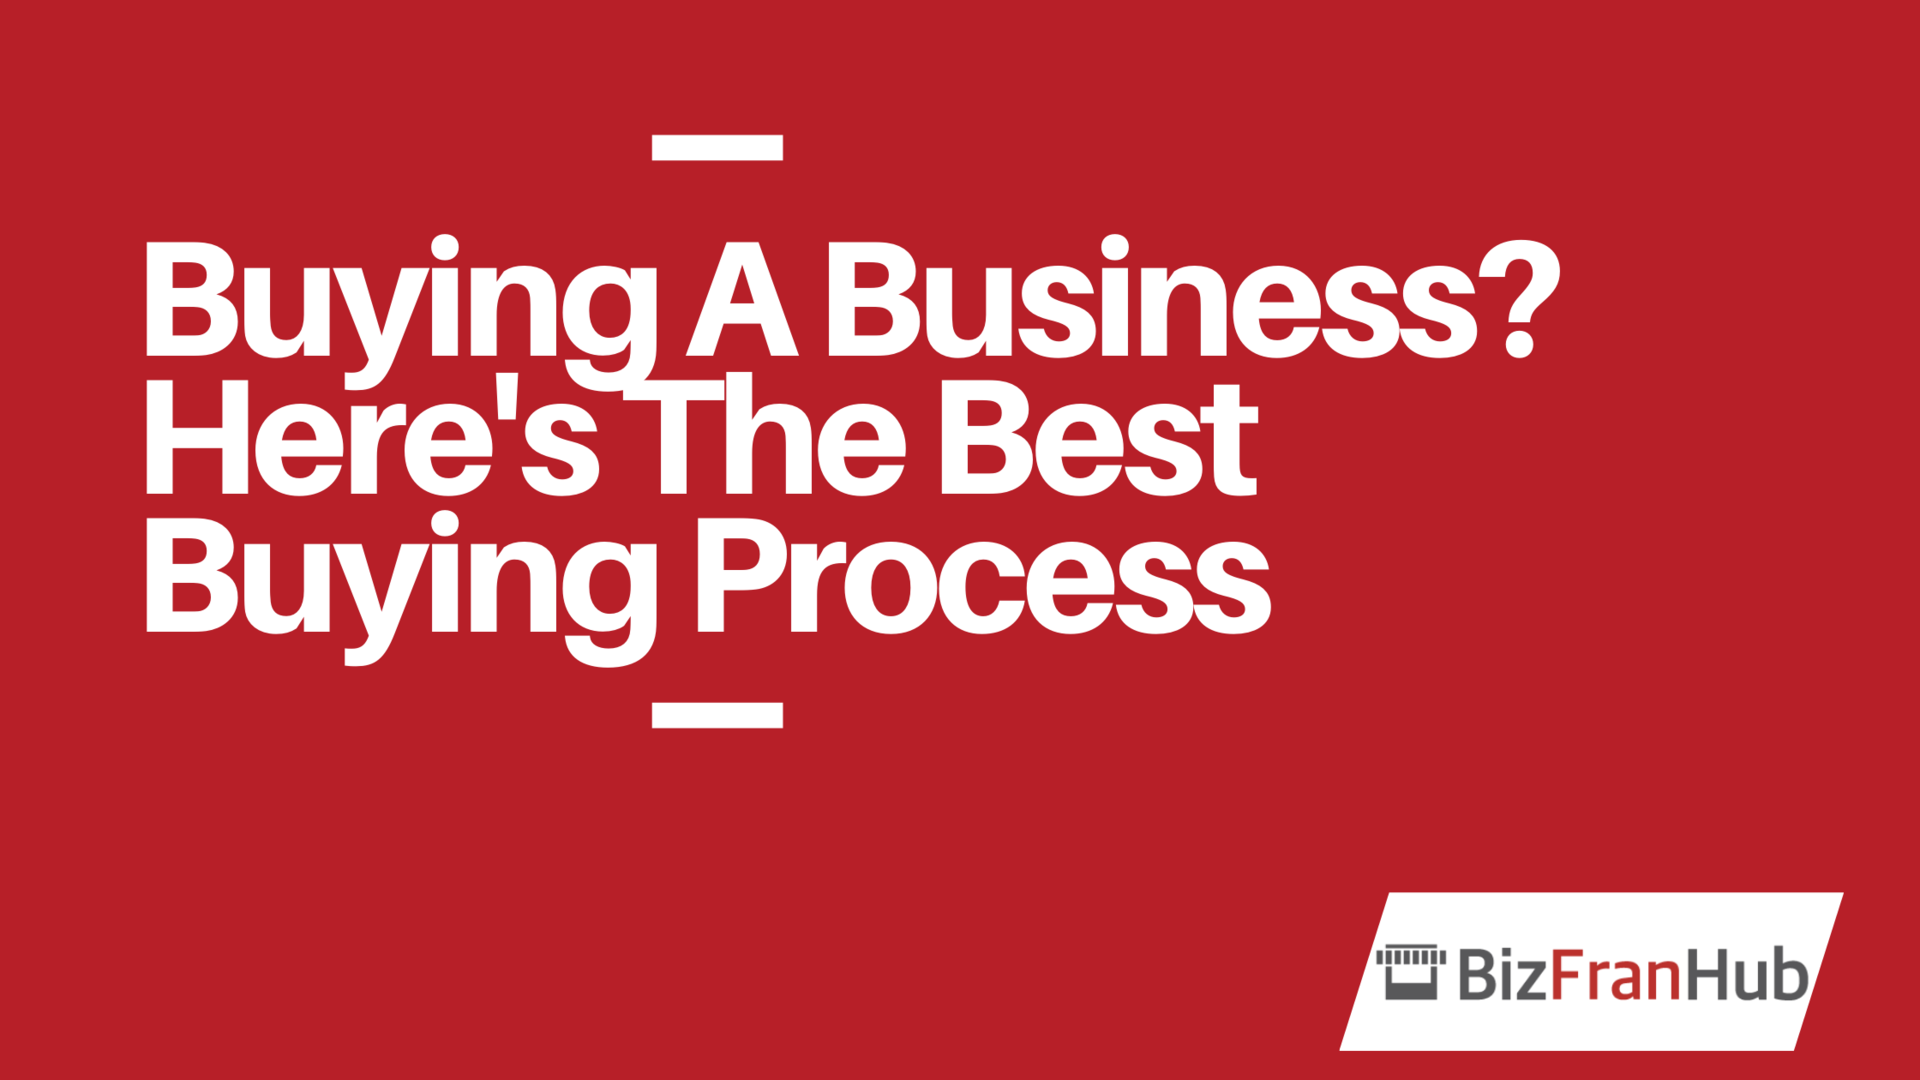 Buying A Business? Here's The Best Buying Process!